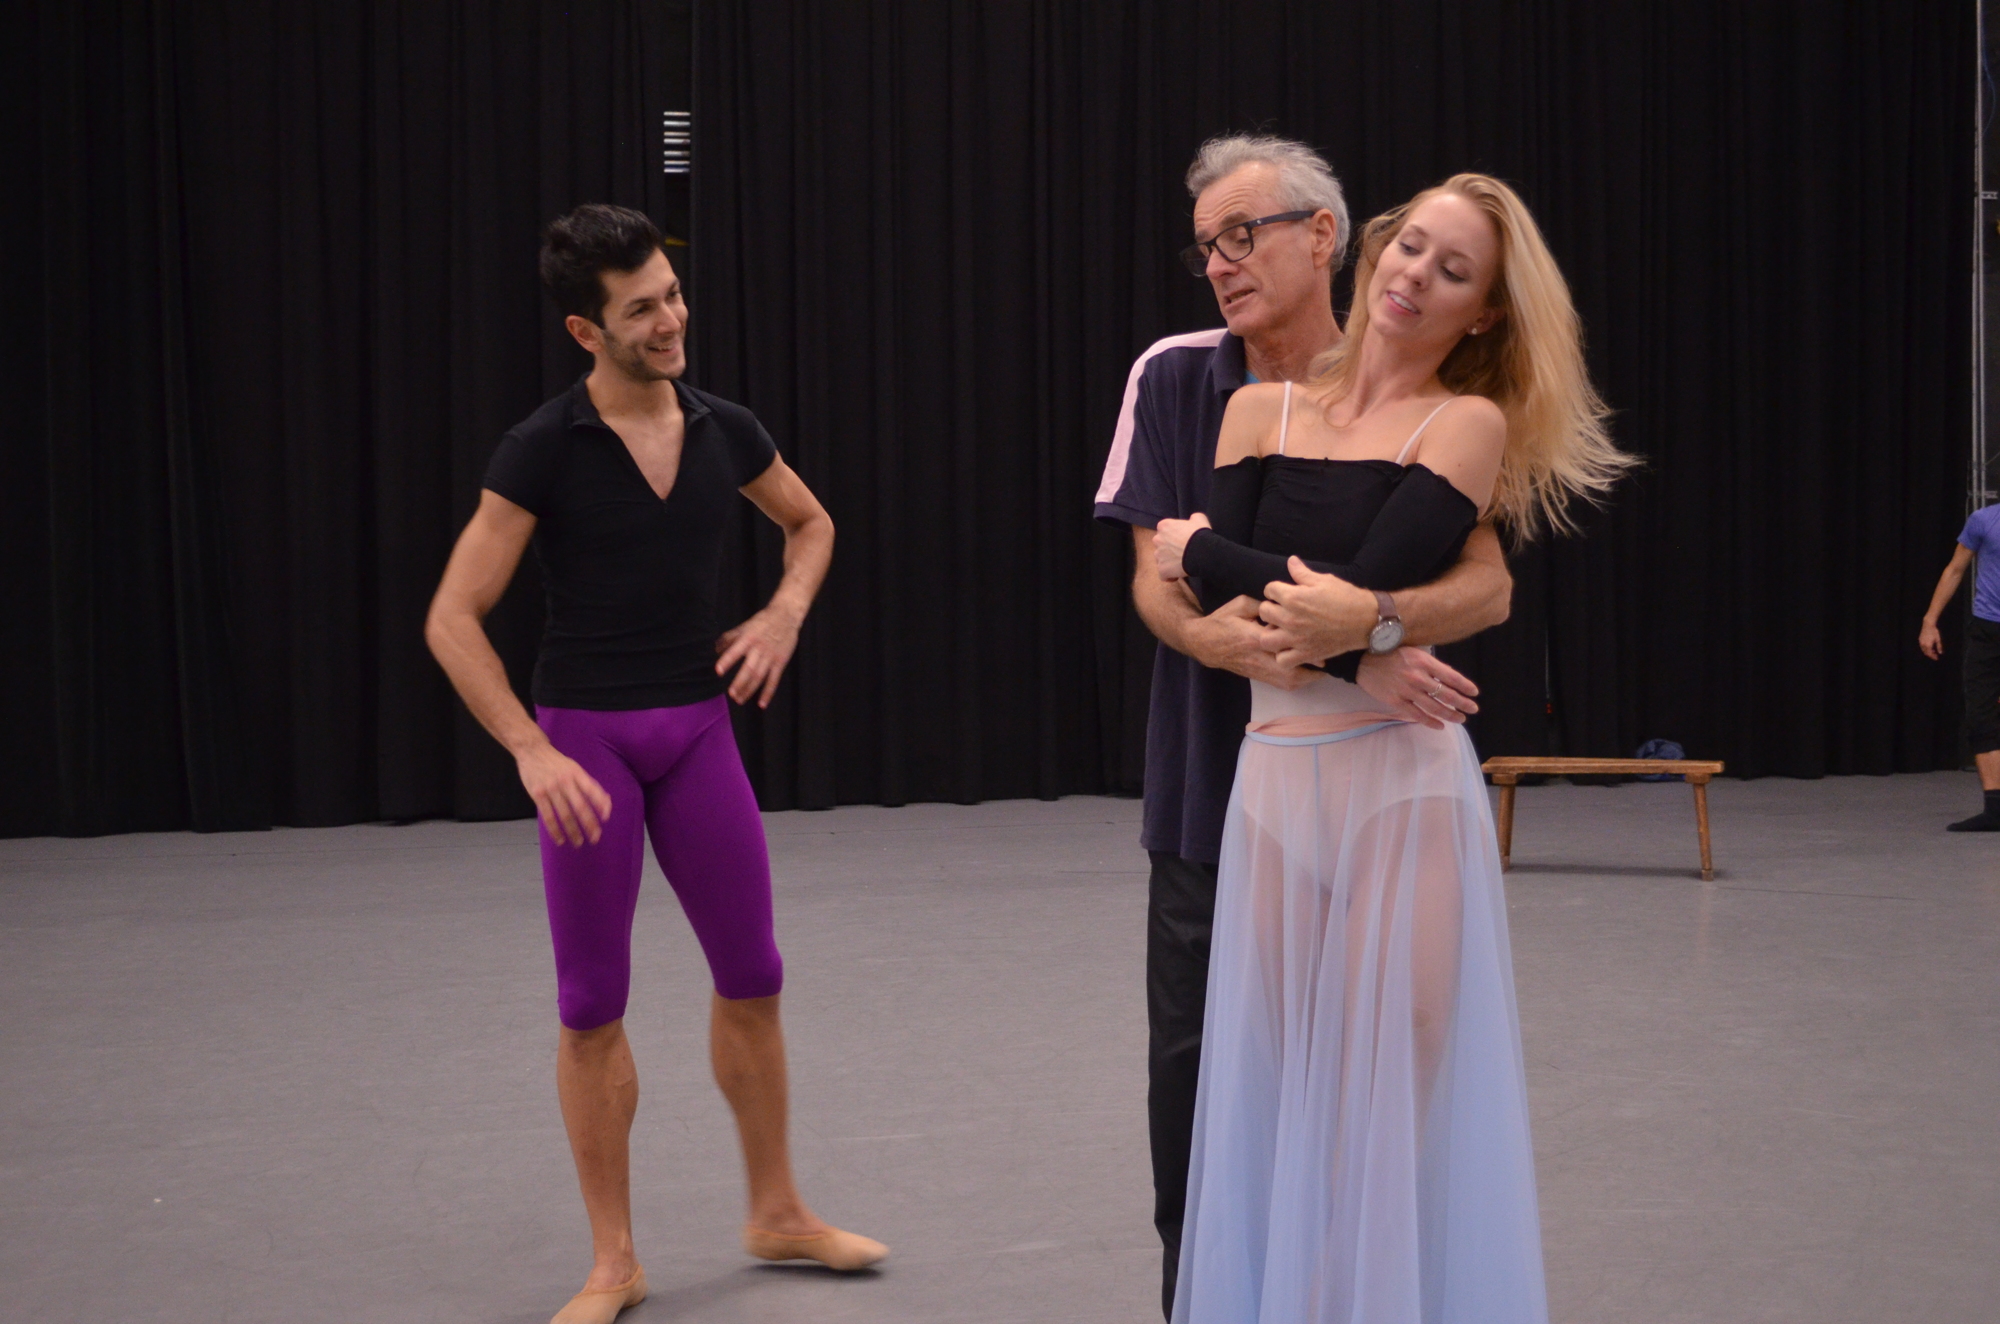 Grant Coyle shows Ricardo Graziano how to passionately hold his partner Victoria Hulland in Sir Frederick Ashton's 